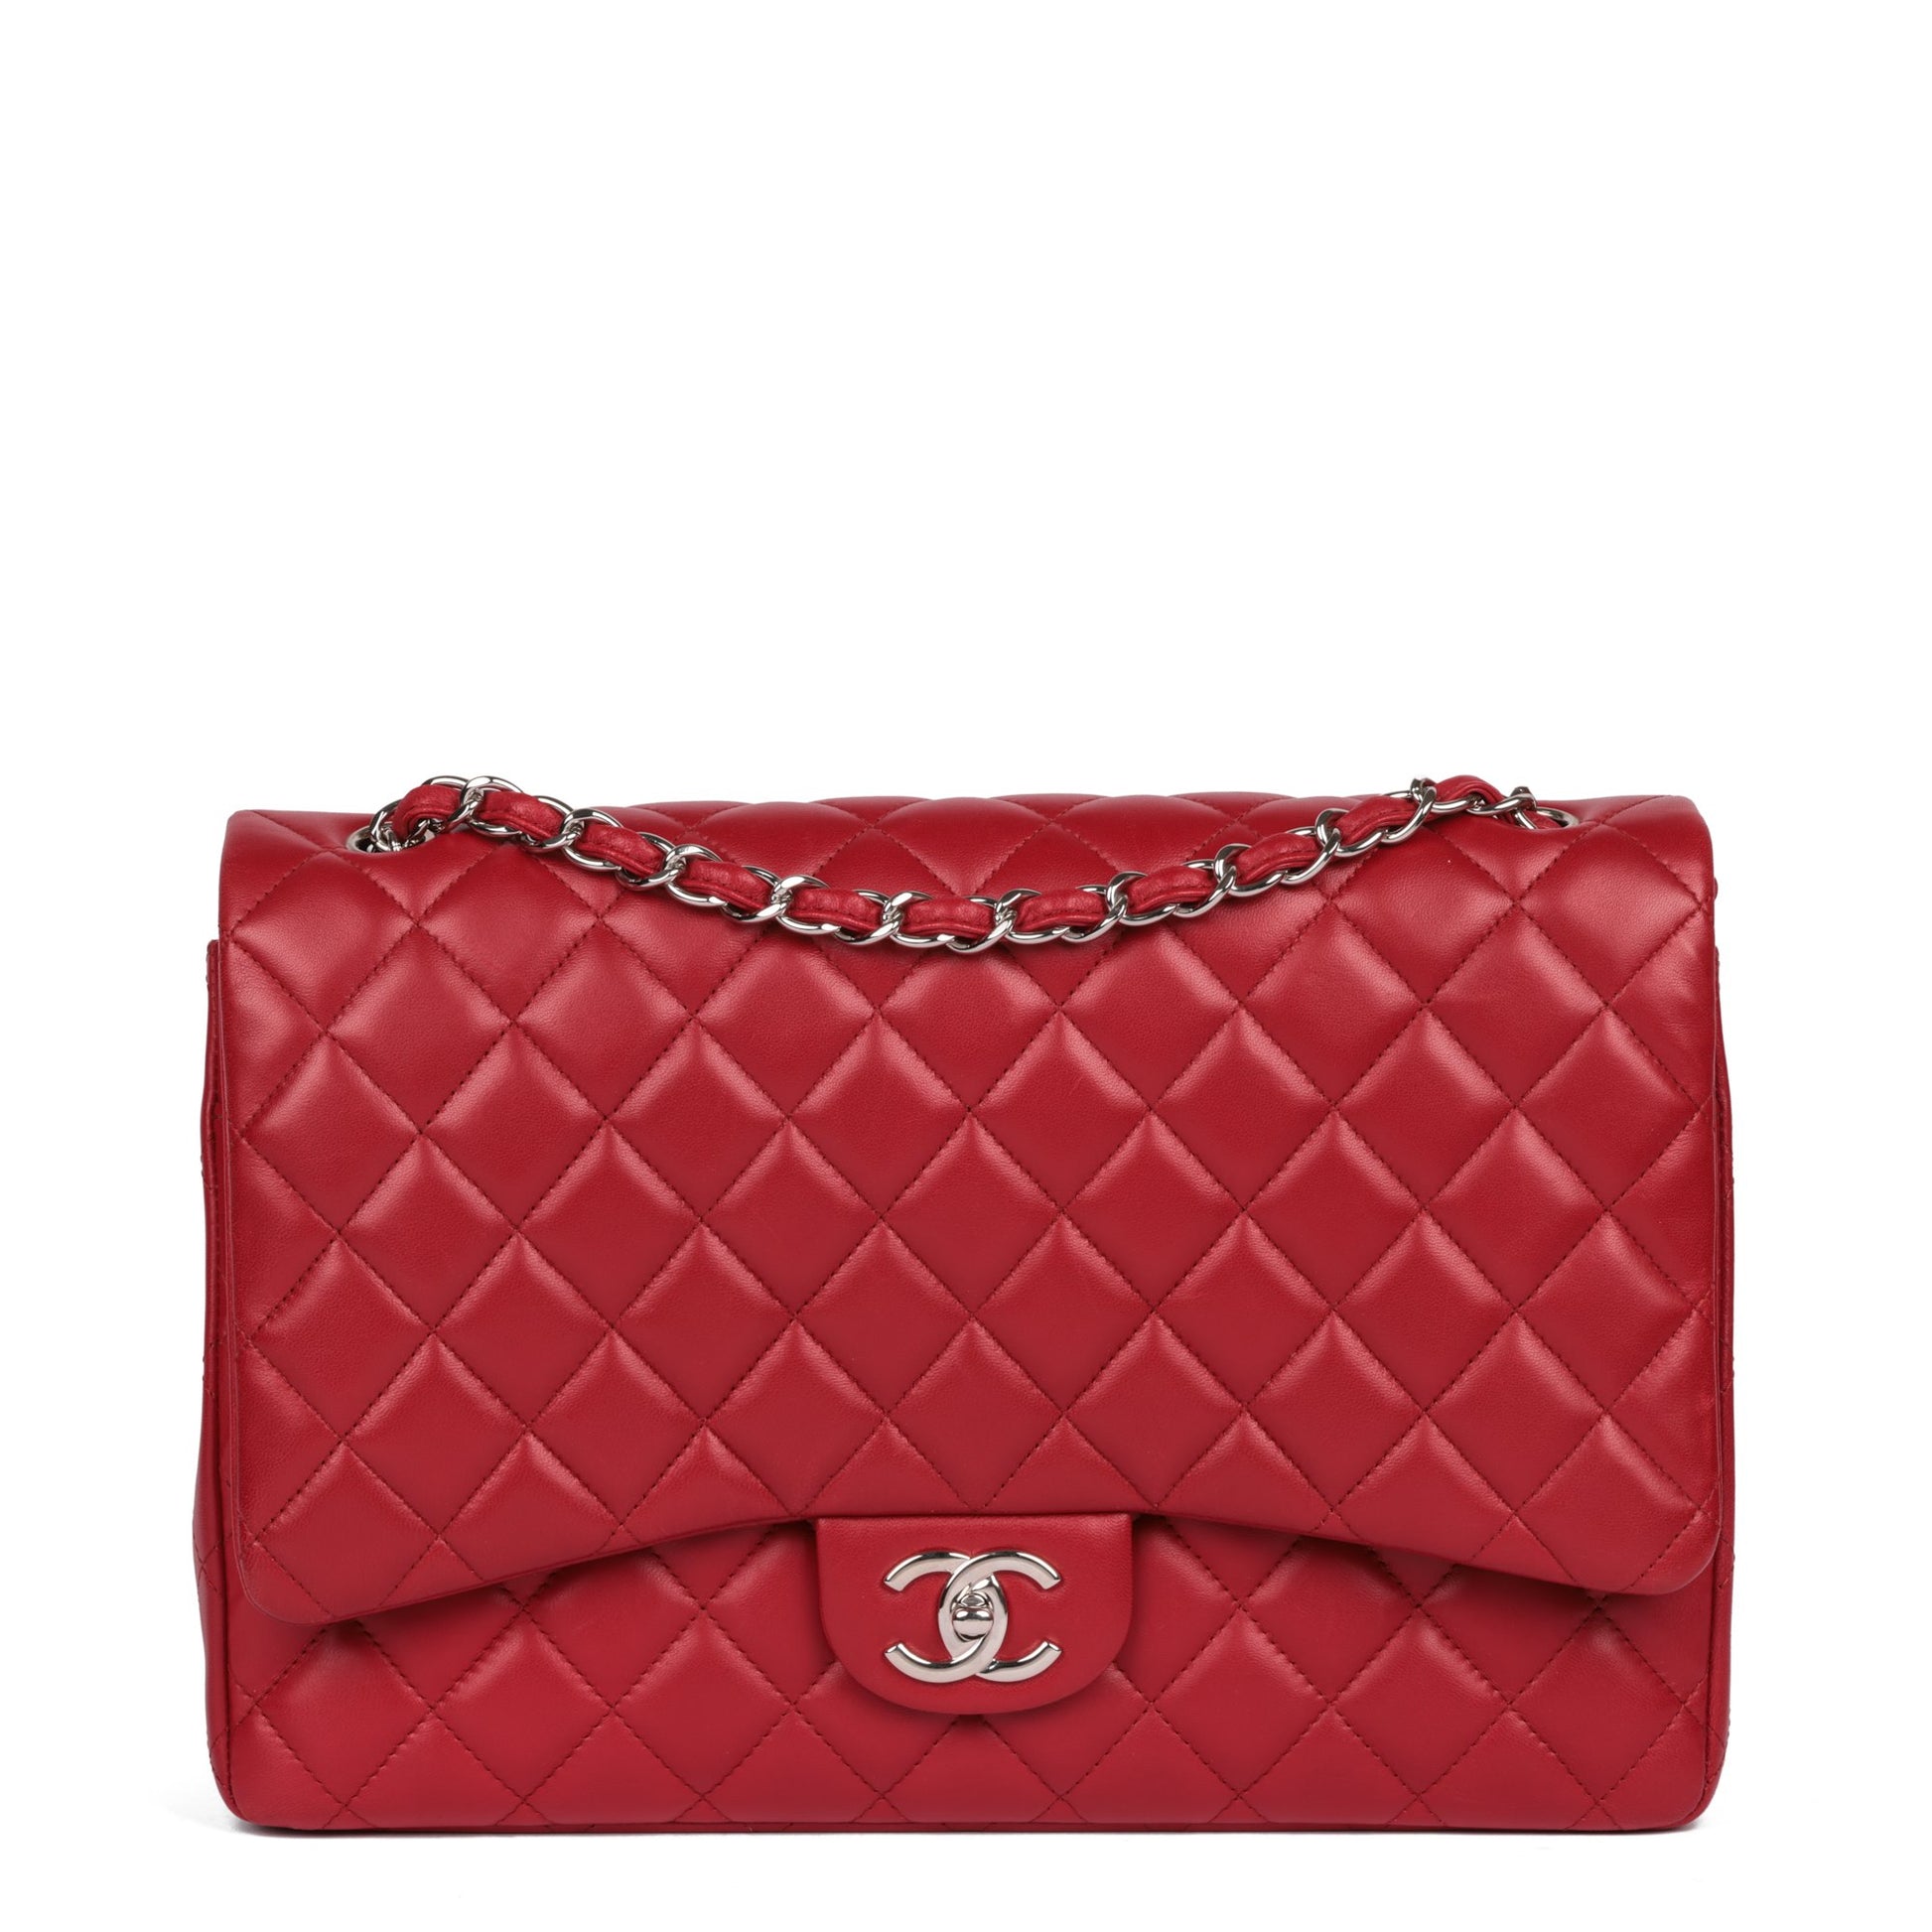 Chanel Dark Red Quilted Patent Leather Maxi Classic Double Flap Bag